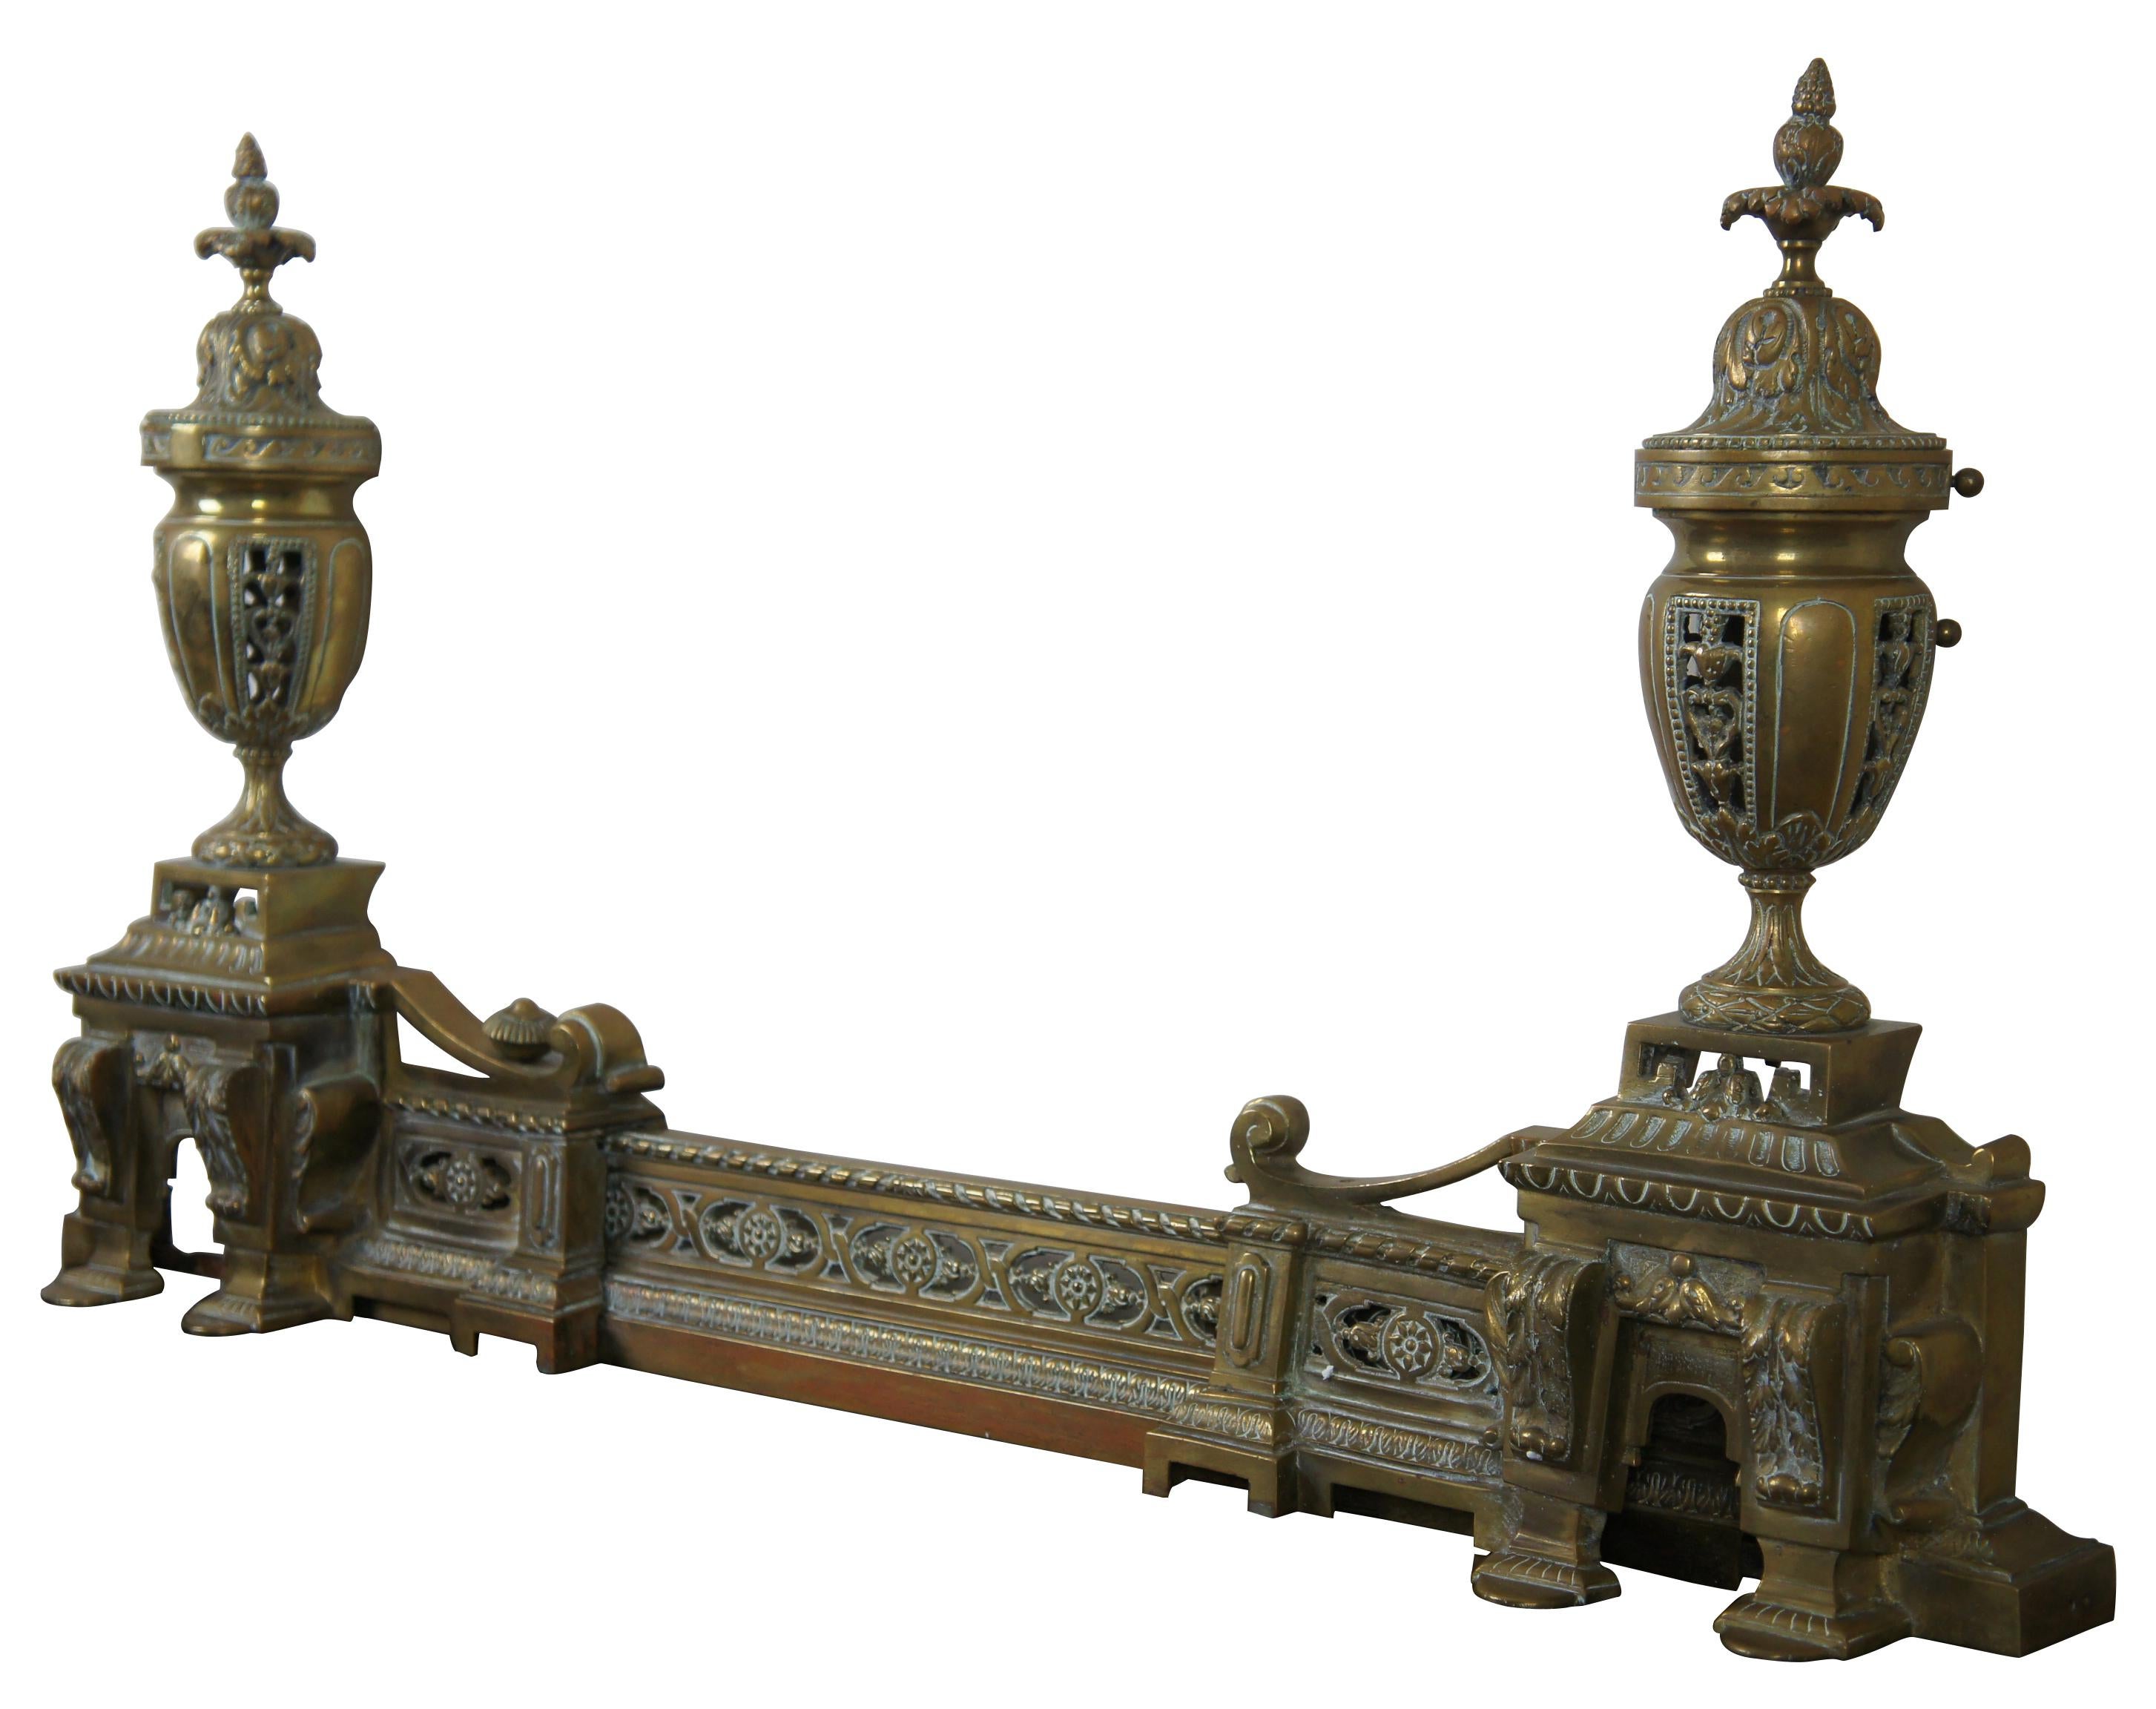 Antique Louis XVI style French gilt bronze chenets and fender andiron adjustable

Napoleon III French adjustable fireplace fender and andirions. Beautiful details with large trophy urns mounted along the andirons, acanthus engravings, trophy